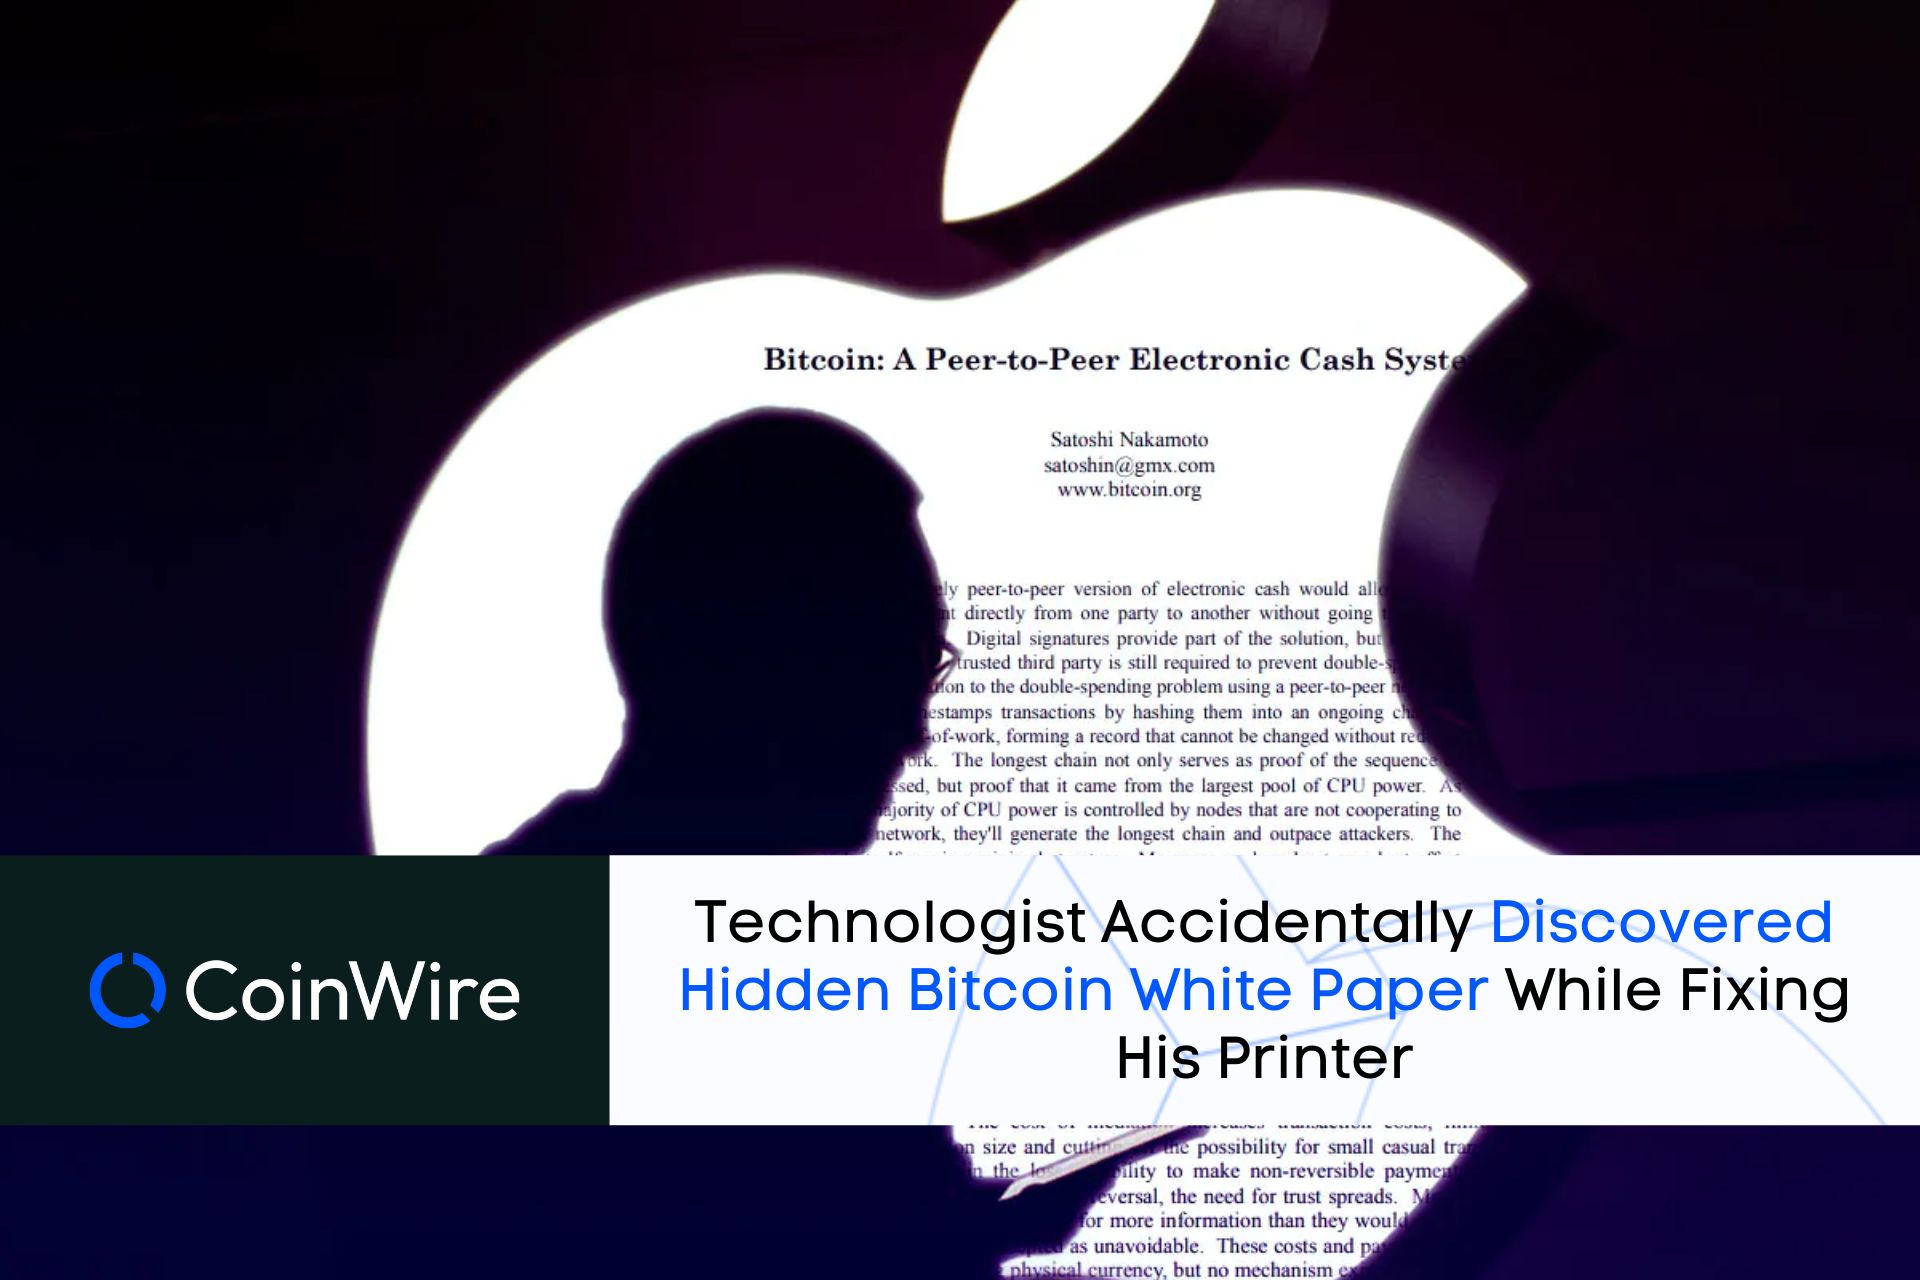 Technologist Accidentally Discovered Hidden Bitcoin White Paper While Fixing His Printer